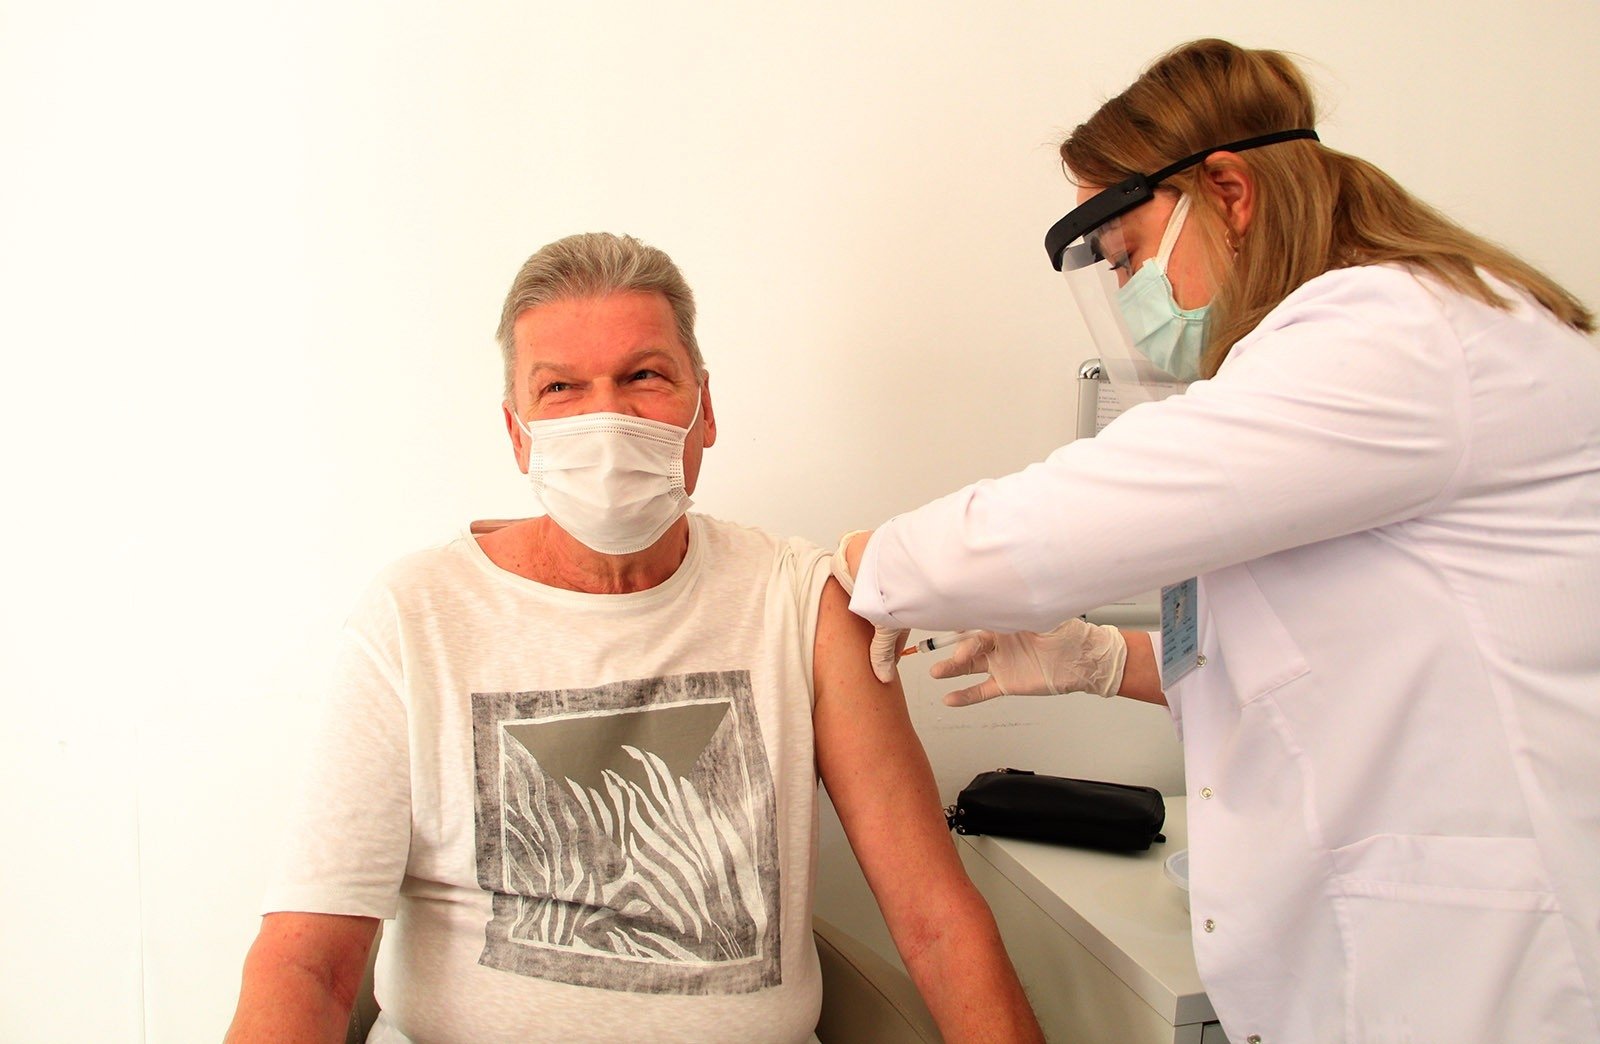 A man gets vaccinated against the coronavirus, in Antalya, southern Turkey, March 5, 2021. (İHA PHOTO)